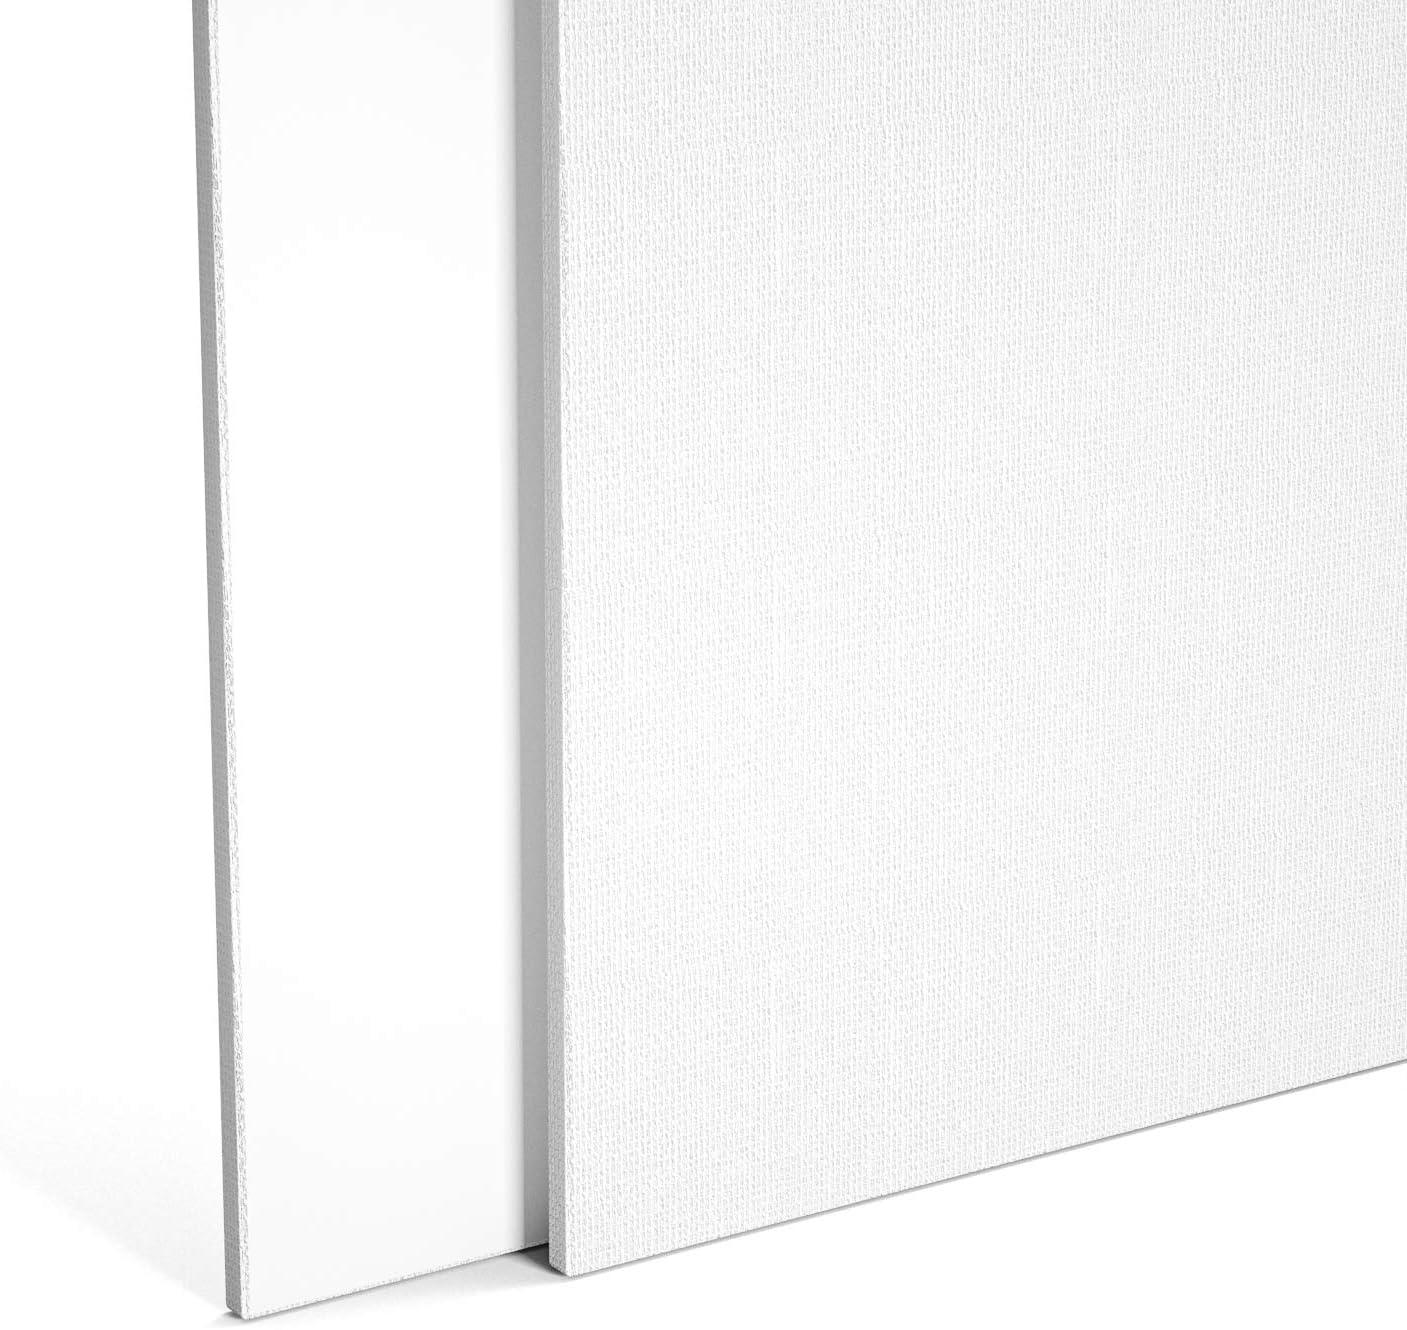 Canvas Panels 11x14 Inch 12-Pack, 10 oz Primed 100% Cotton Canvases for  Painting, White Blank Flat Canvas Boards for Oil Acrylics Watercolor  Tempera